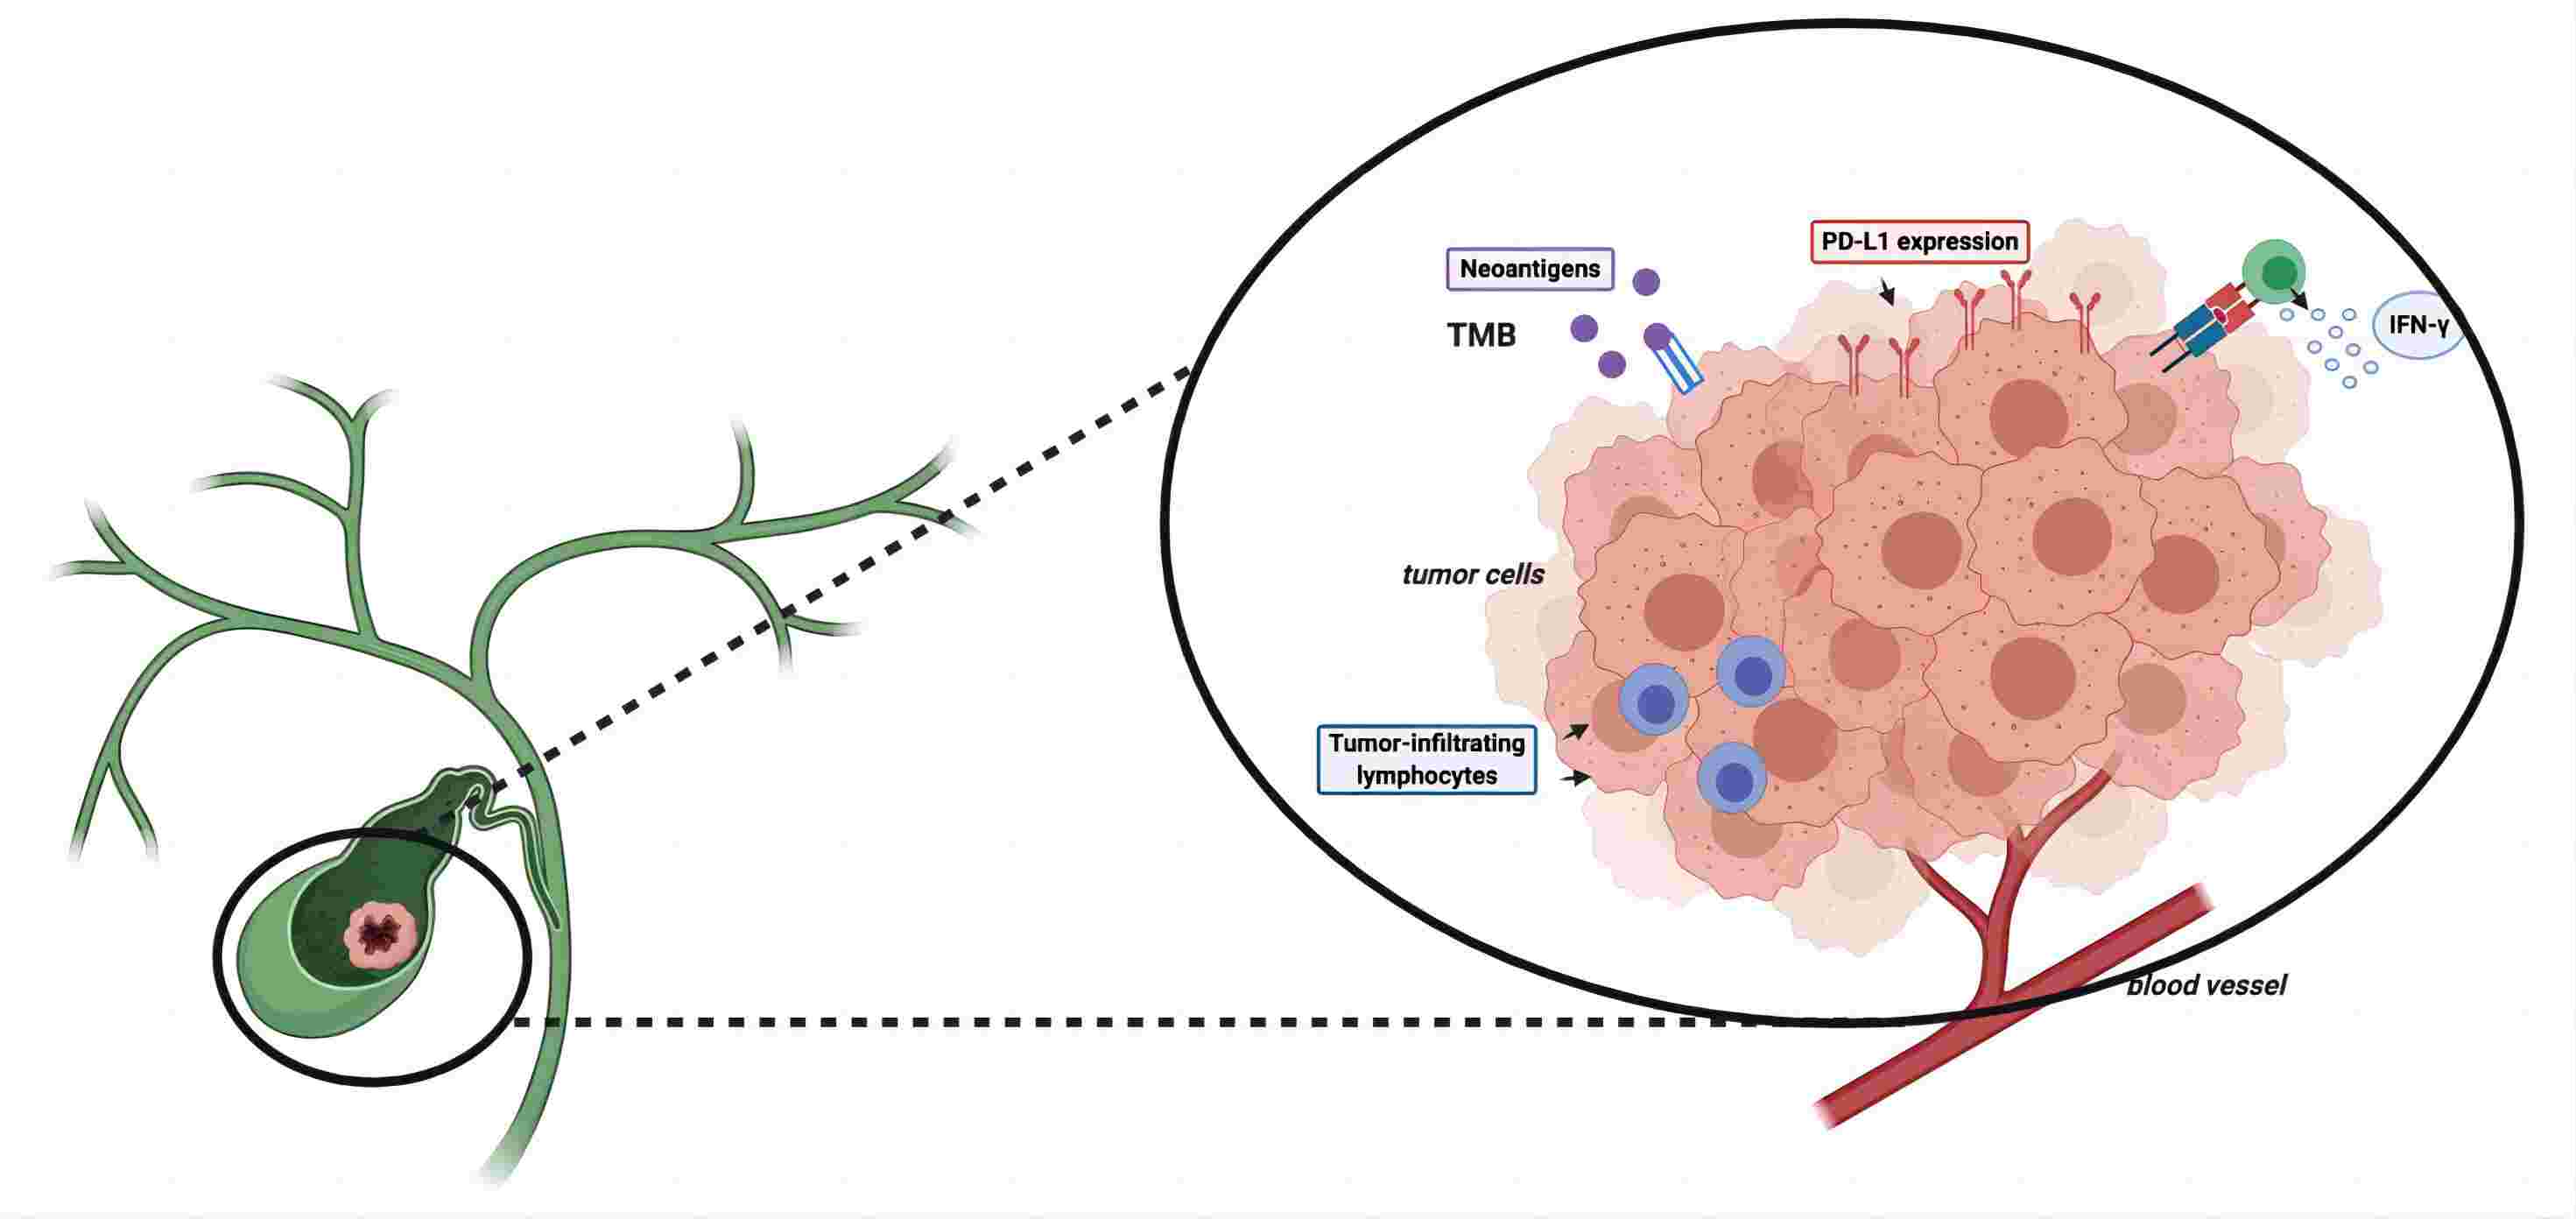 Diagram illustrating potential immune checkpoint inhibitor (ICI) response biomarkers. (Rizzo, et al., 2021)